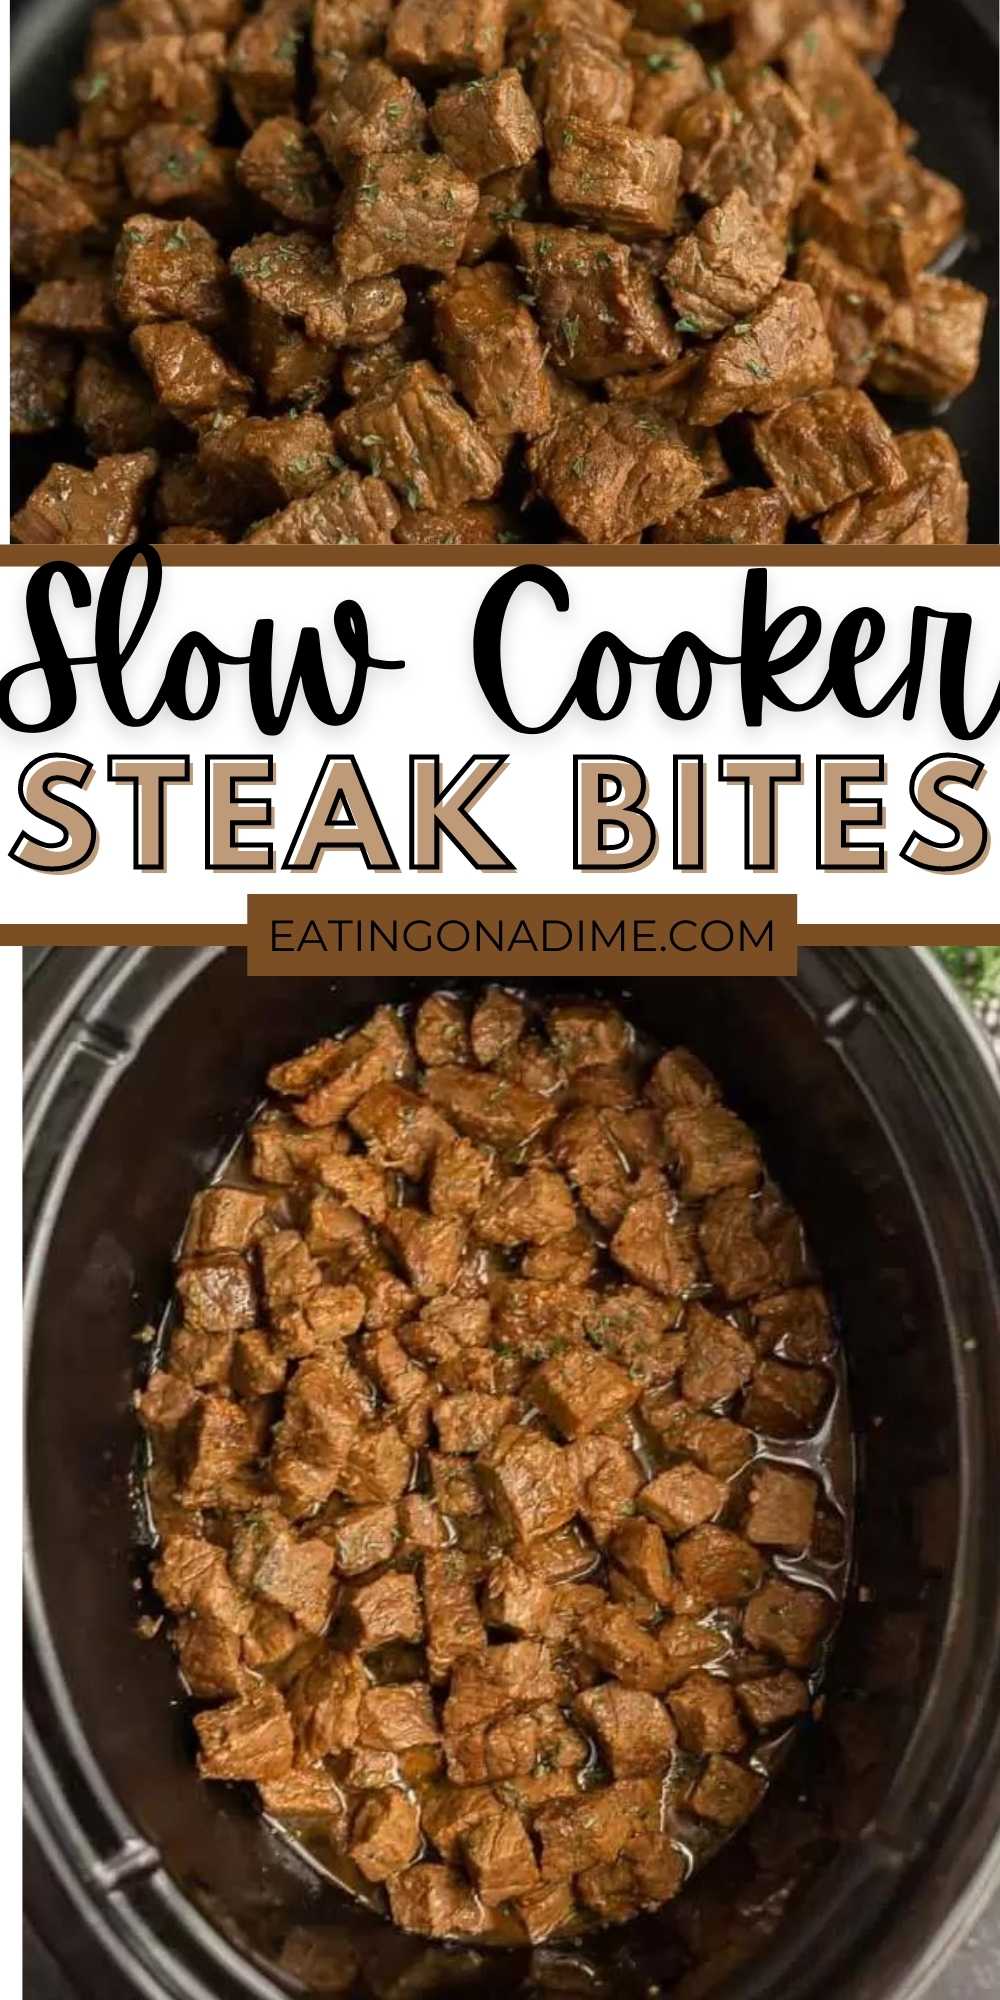 Dinner is a breeze when you make this easy Crock Pot Steak Bites Recipe. The entire family will love keto steak bites. Each bite is tender and delicious! This is one of the easiest recipes for dinner. Plus this is an easy crock pot meal.  #eatingonadime #crockpotrecipes #slowcookerrecipes #steakrecipes 
